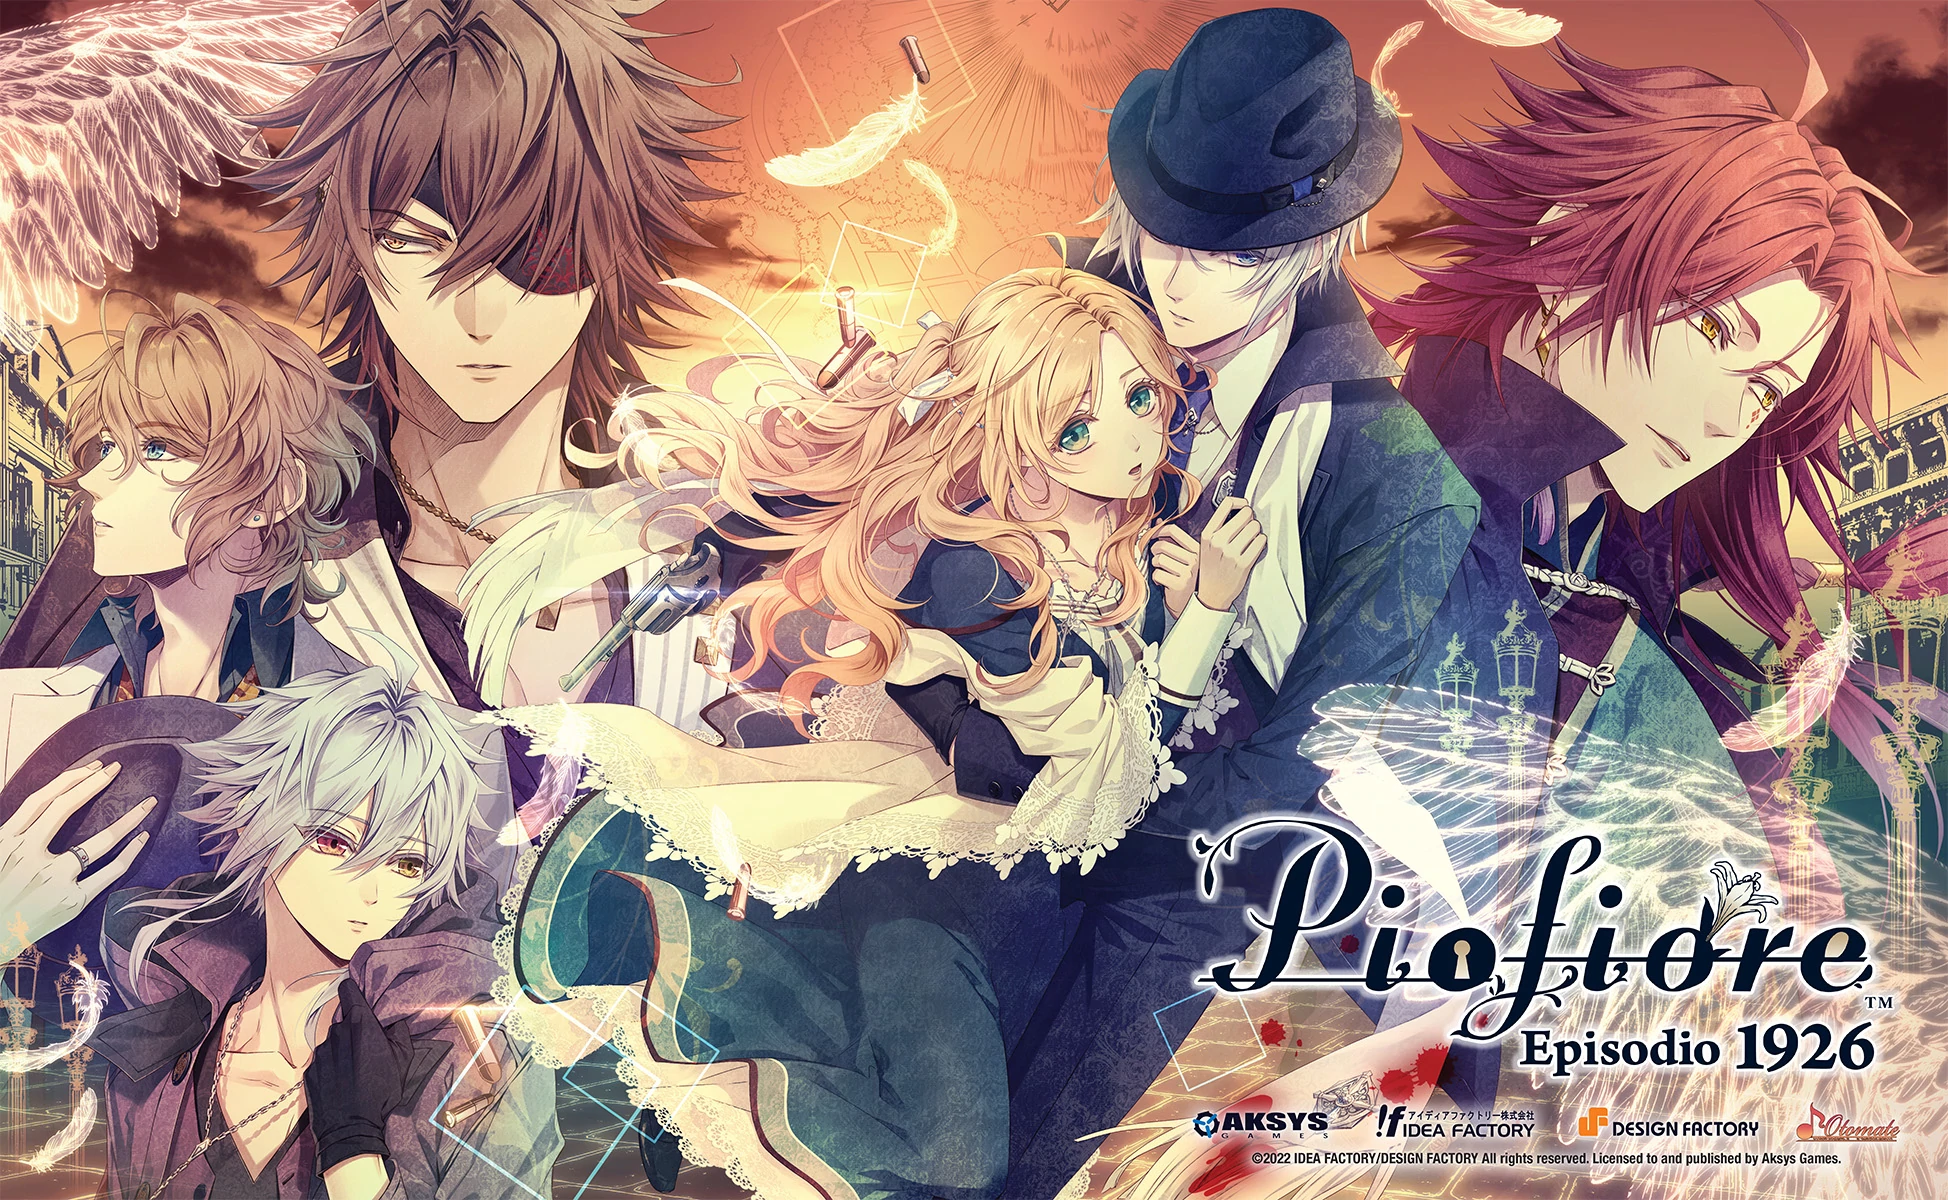 Aksys Games Reveals Launch Date, Exclusive Card Set for Piofiore: Episodio 1926